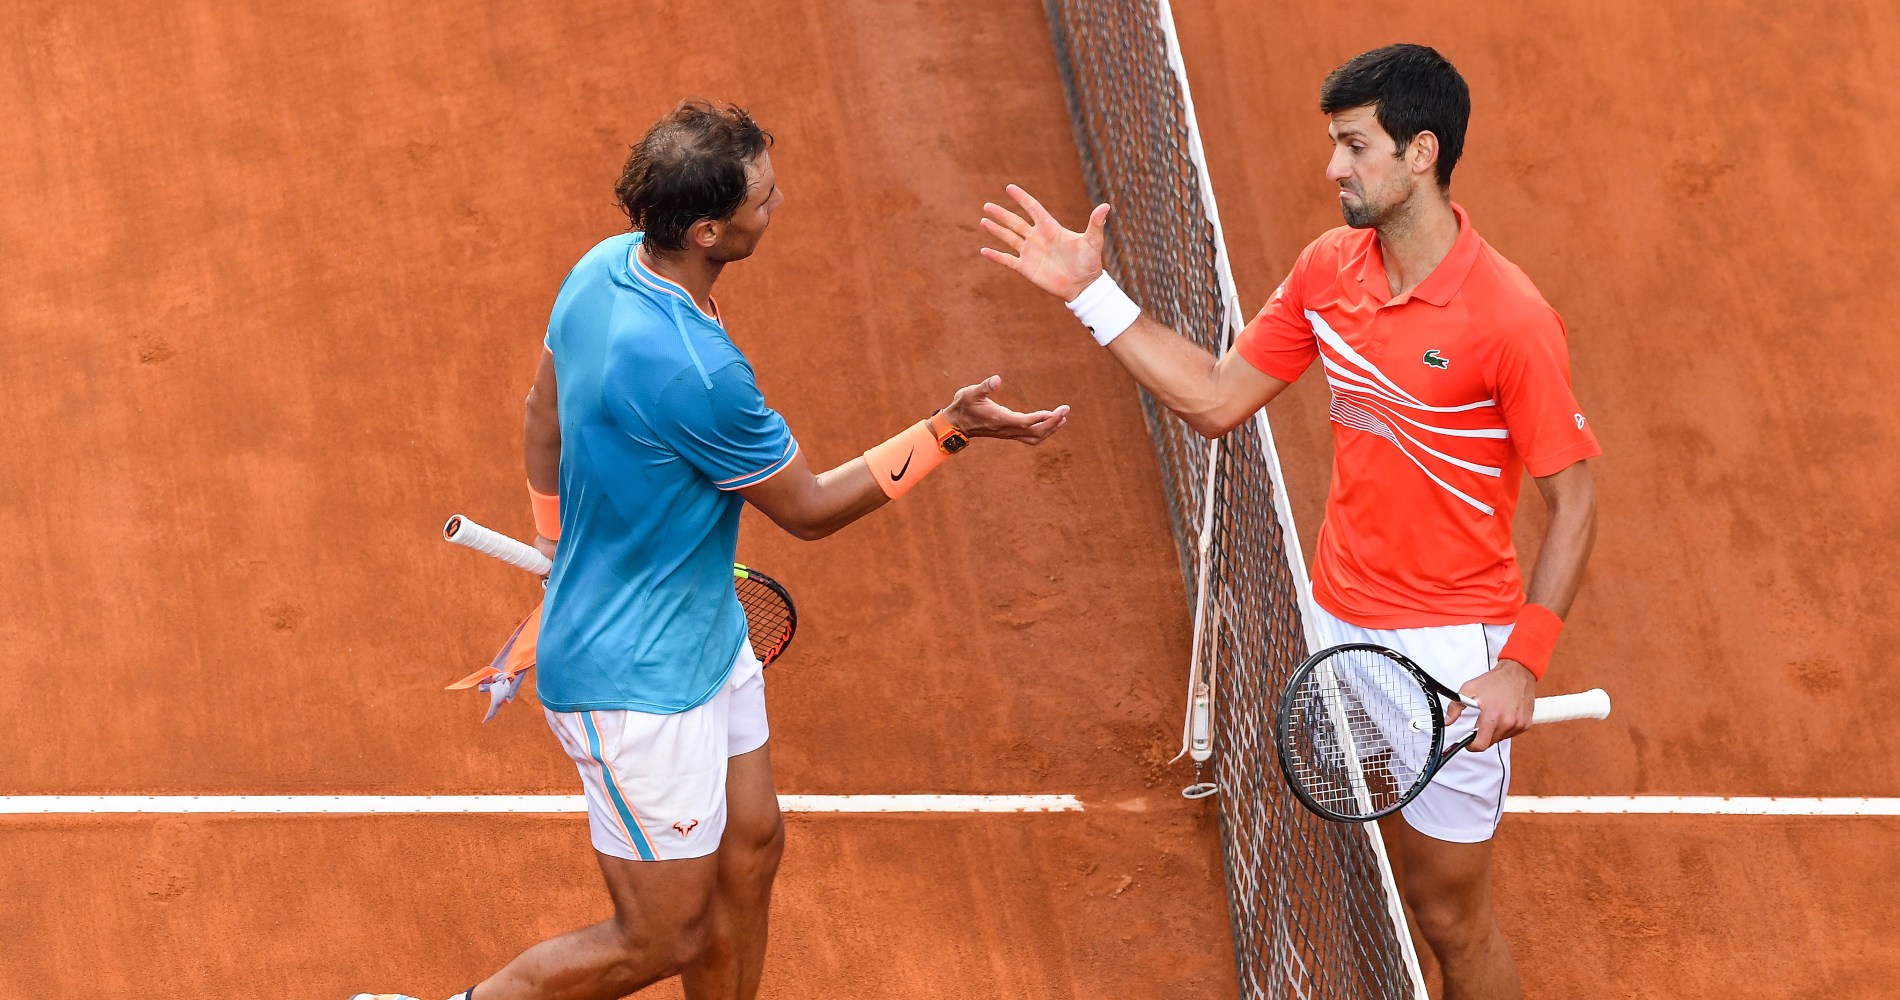 Nadal vs Djokovic GOAT, headtohead, stats, all you need to know